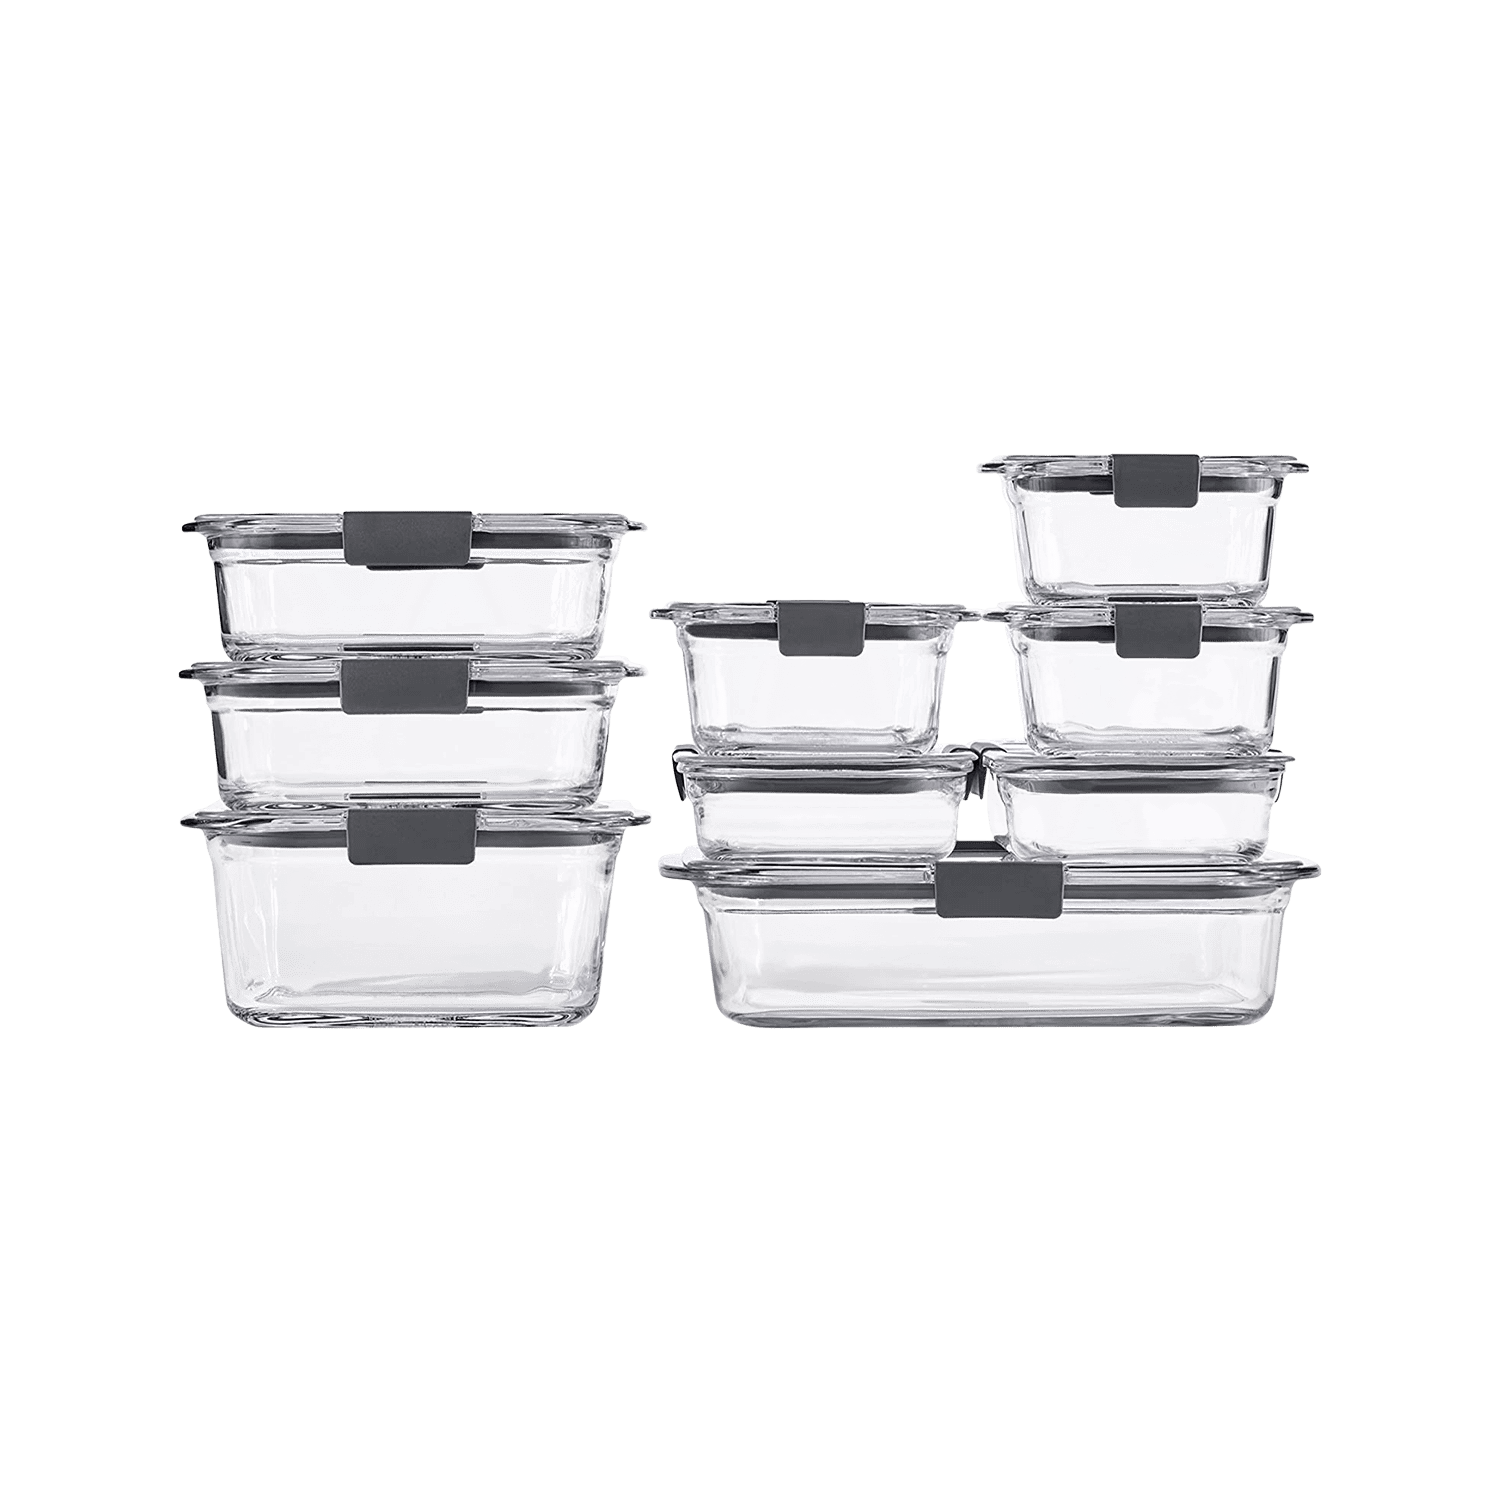 https://cdn.apartmenttherapy.info/image/upload/v1690819279/at/Org%20Awards%202023/products/rubbermaid-brilliance-glass-storage-set.png